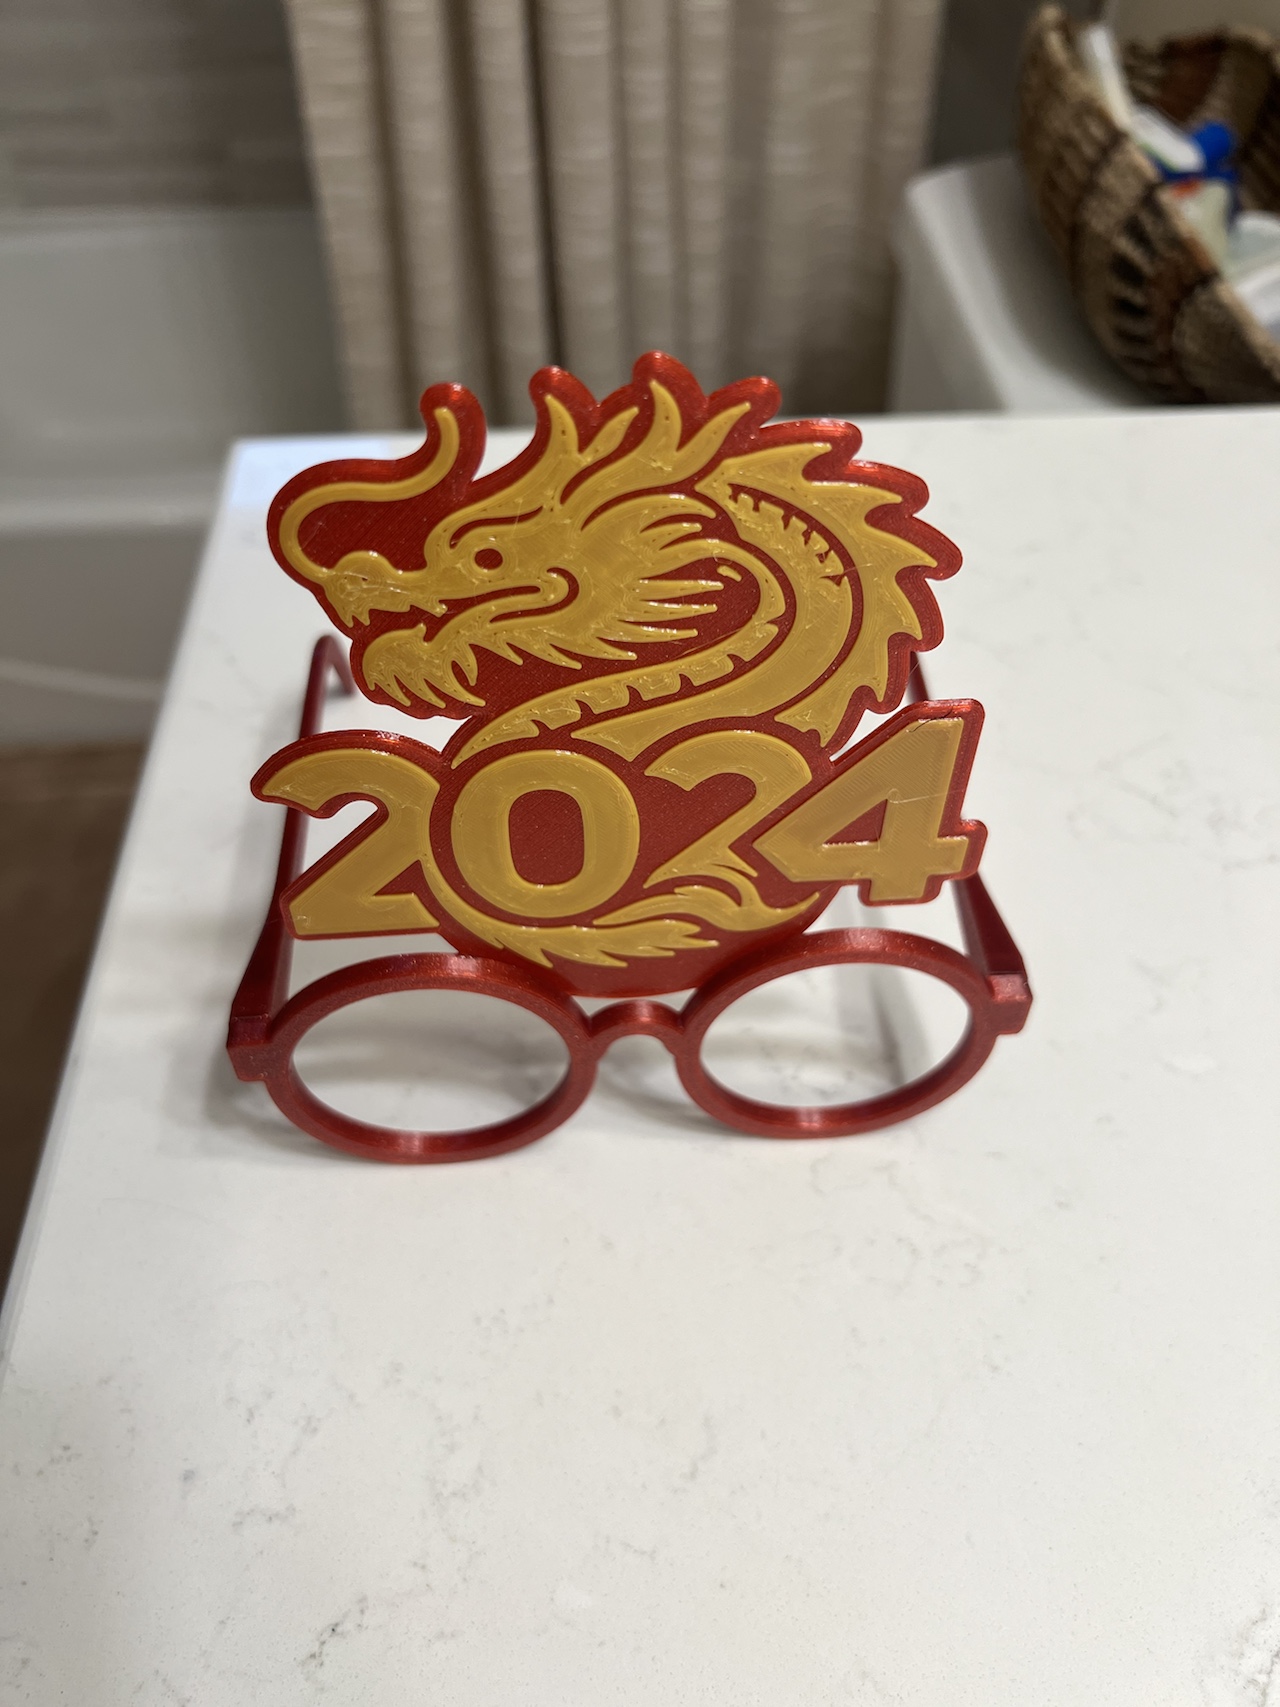 Year of the Dragon Glasses 2024 New Year by Adam L Download free